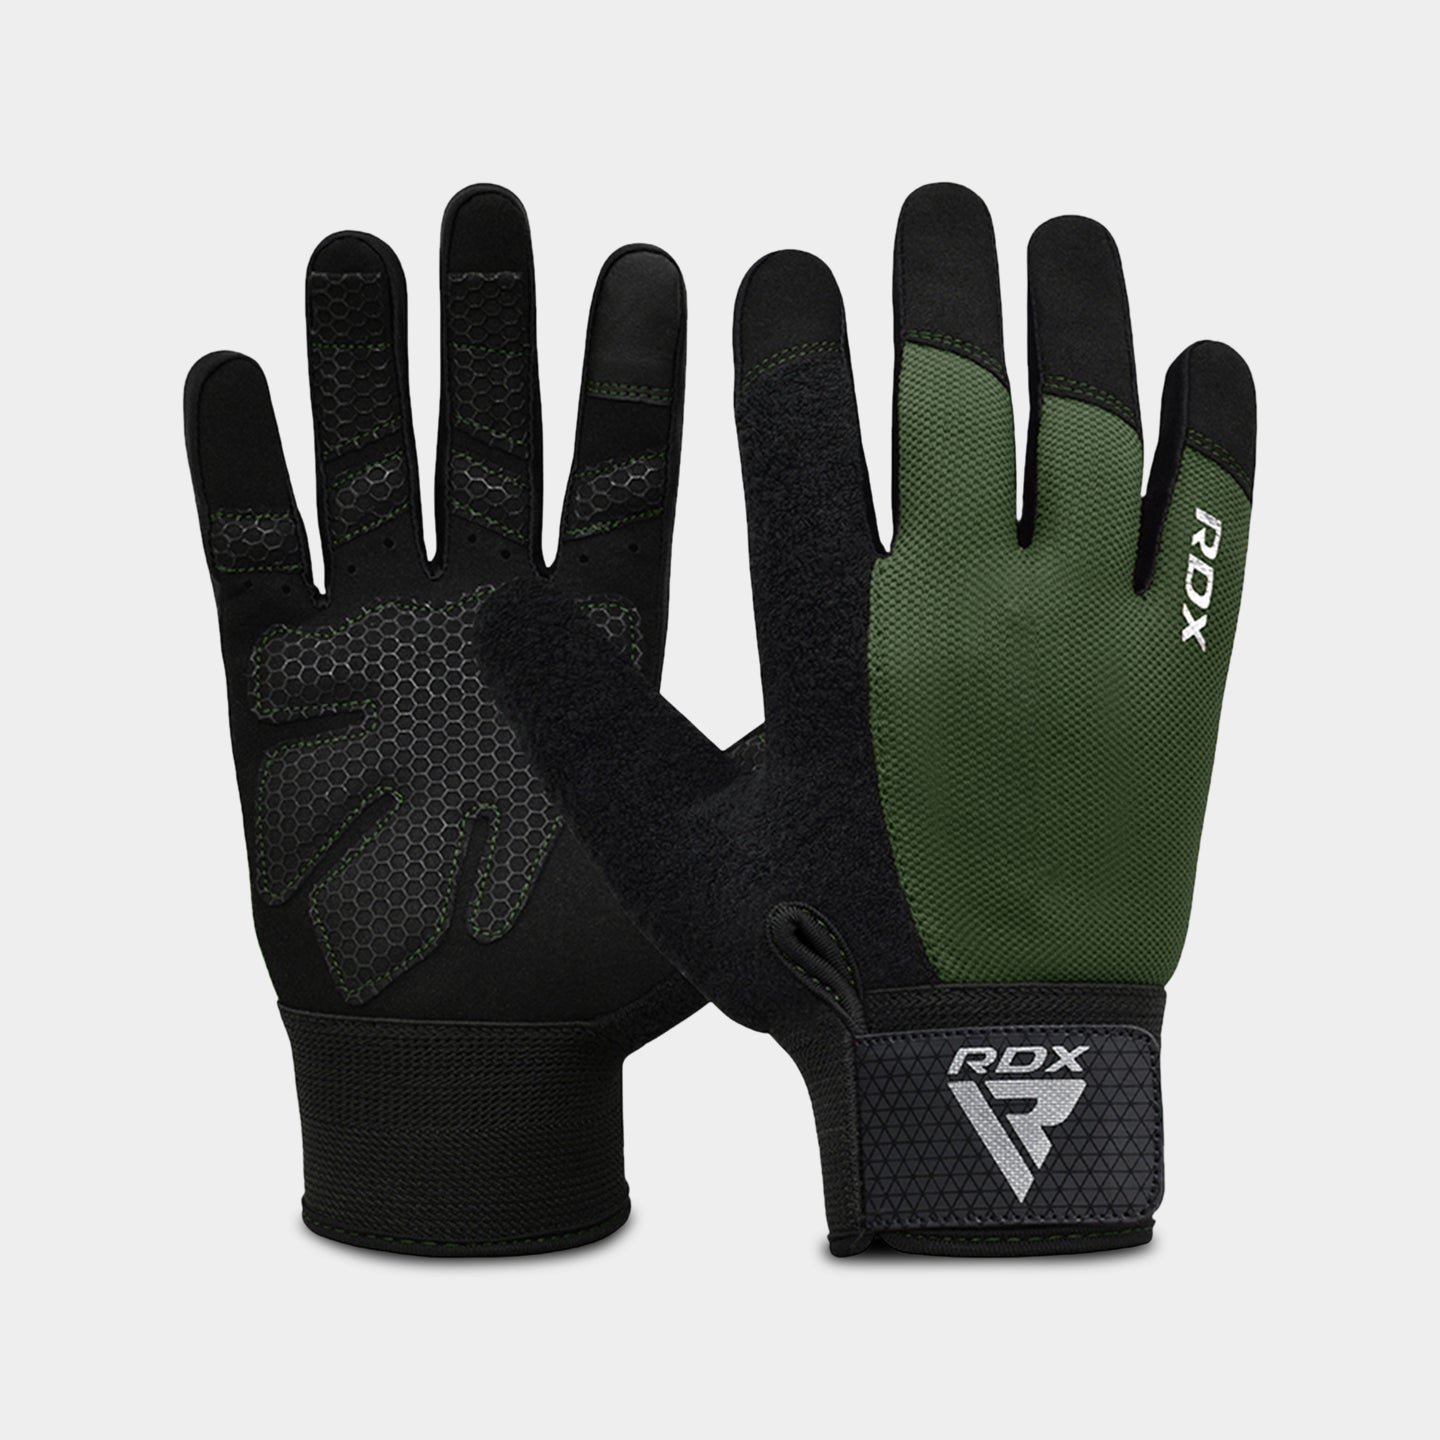 RDX Sports W1F Full Finger Gym Workout Gloves, M, Army Green A1